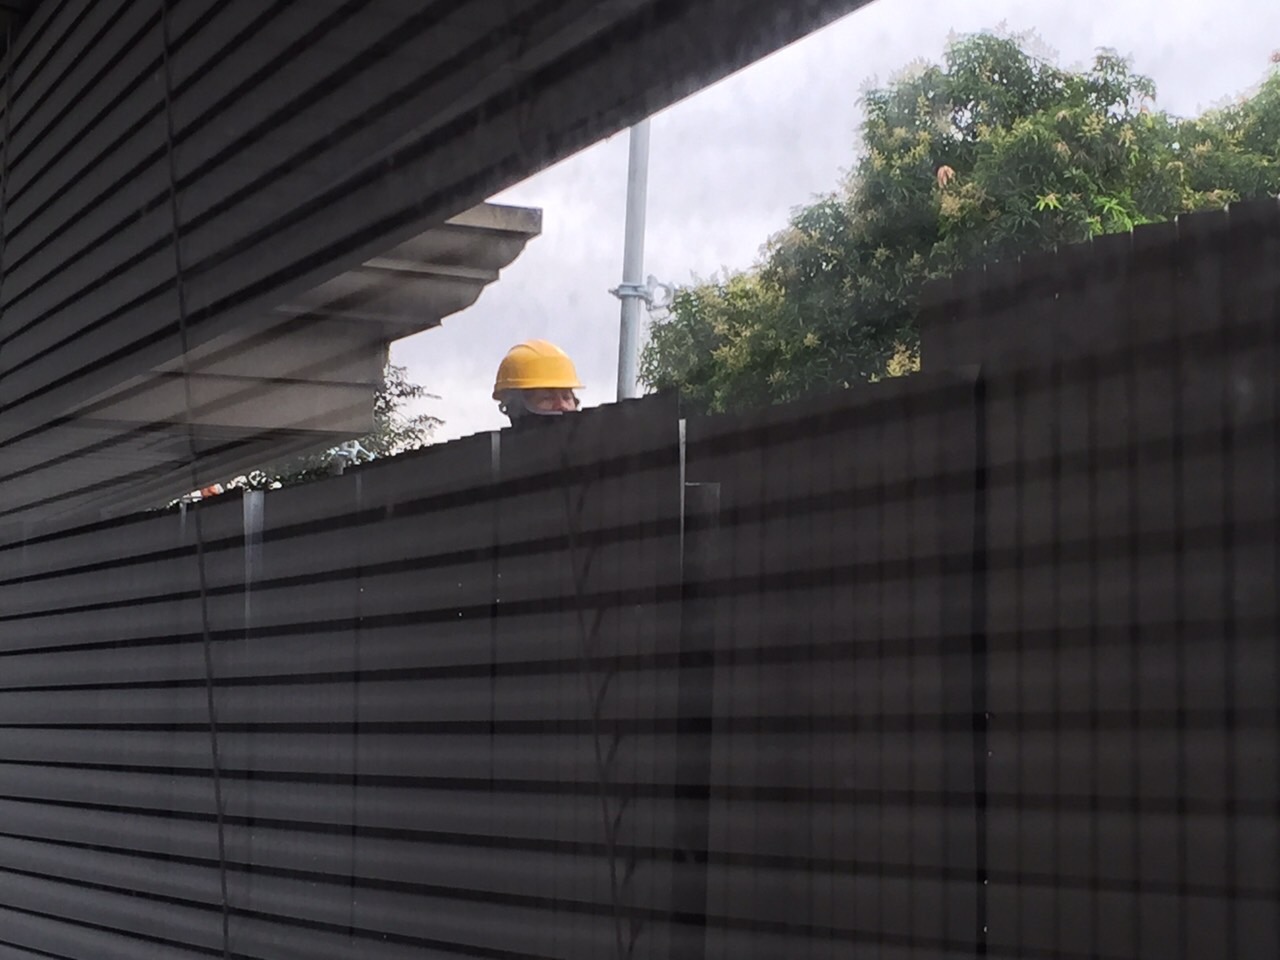 CONSTRUCTION CONTINUES. If construction continues in Tandang Sora, who will enforce the court order? All photos sourced by Rappler  